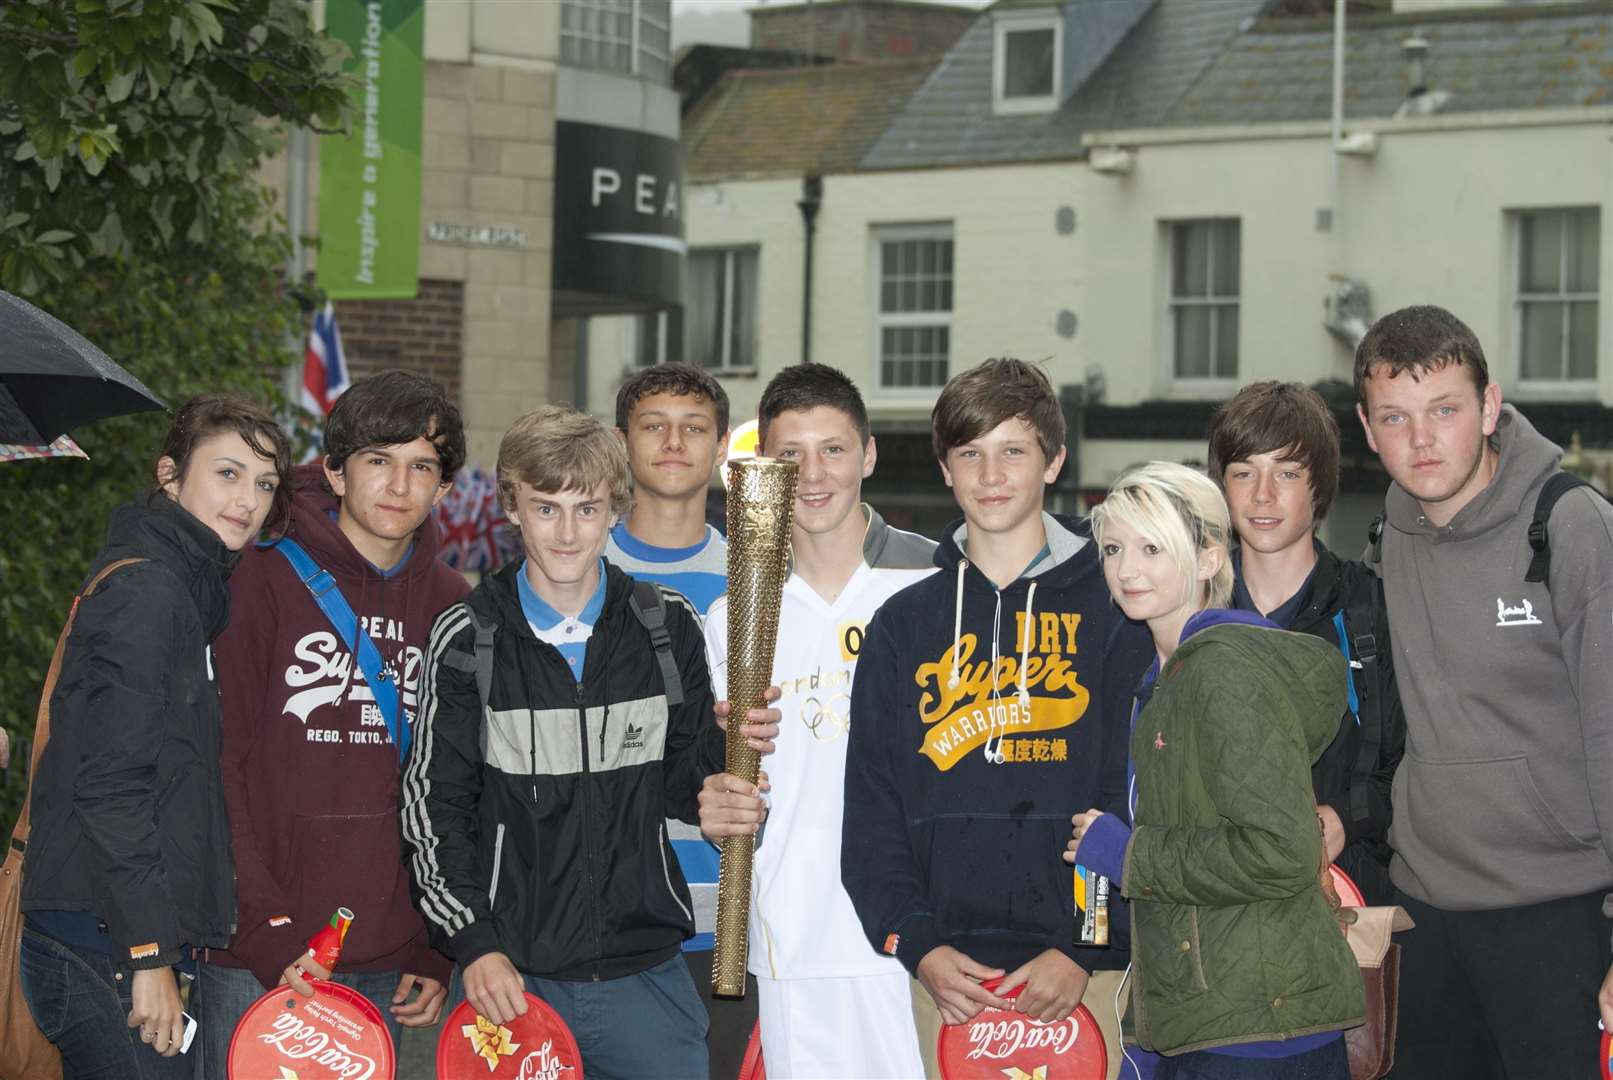 Robbie Herbert's friends from Castle Community College in Deal went to Dover to see him carry the torch. Pic: Alex Sartain